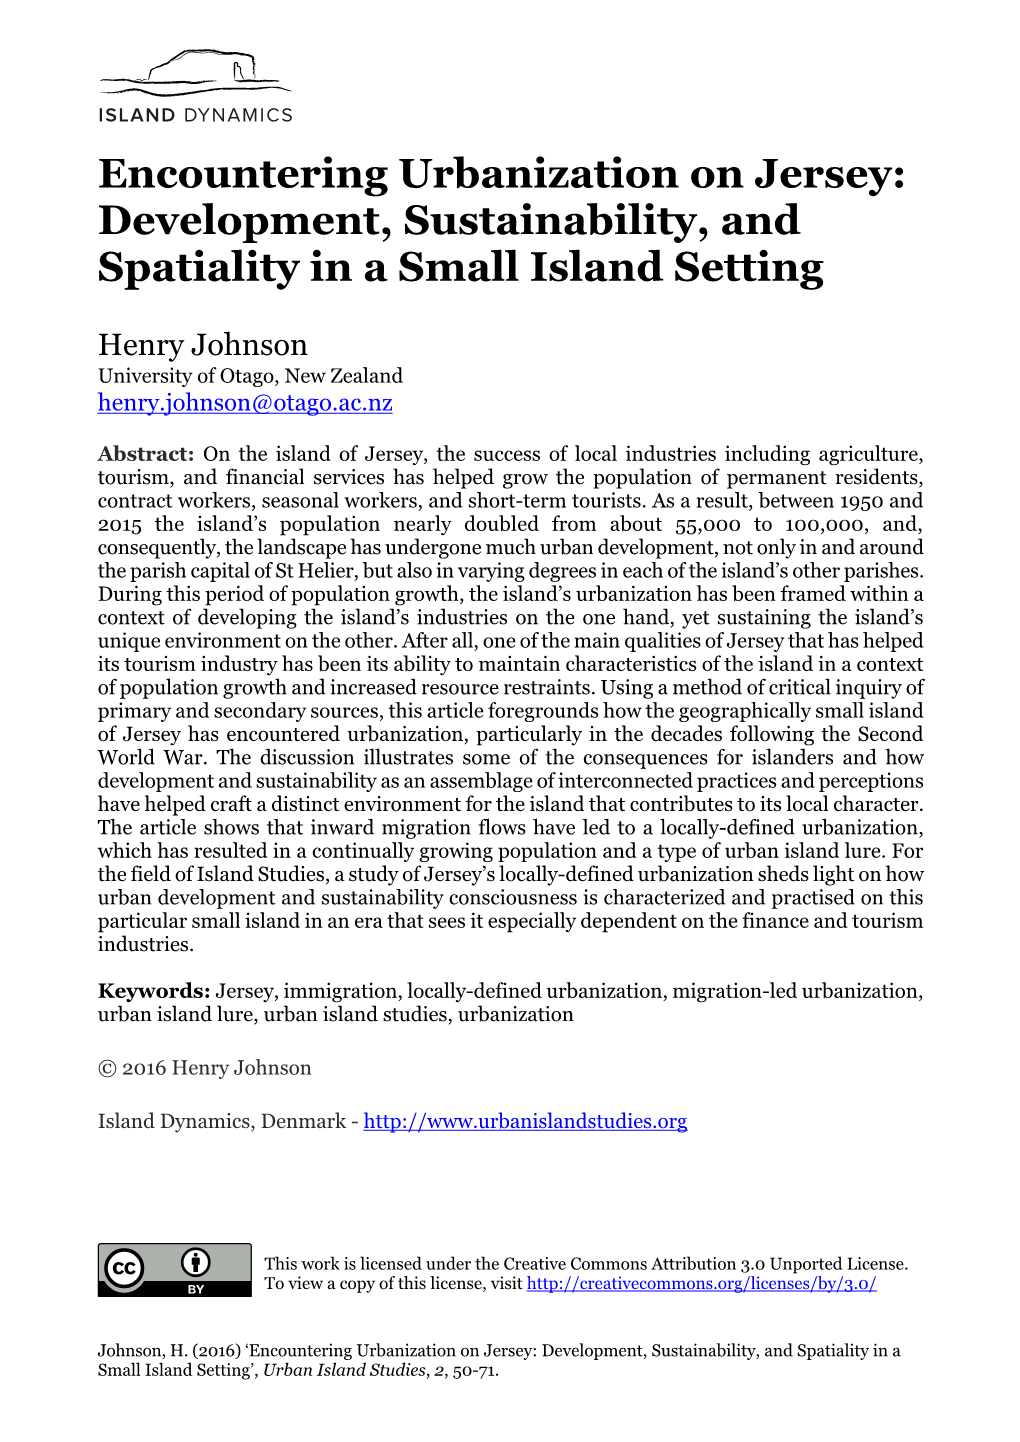 Encountering Urbanization on Jersey: Development, Sustainability, and Spatiality in a Small Island Setting